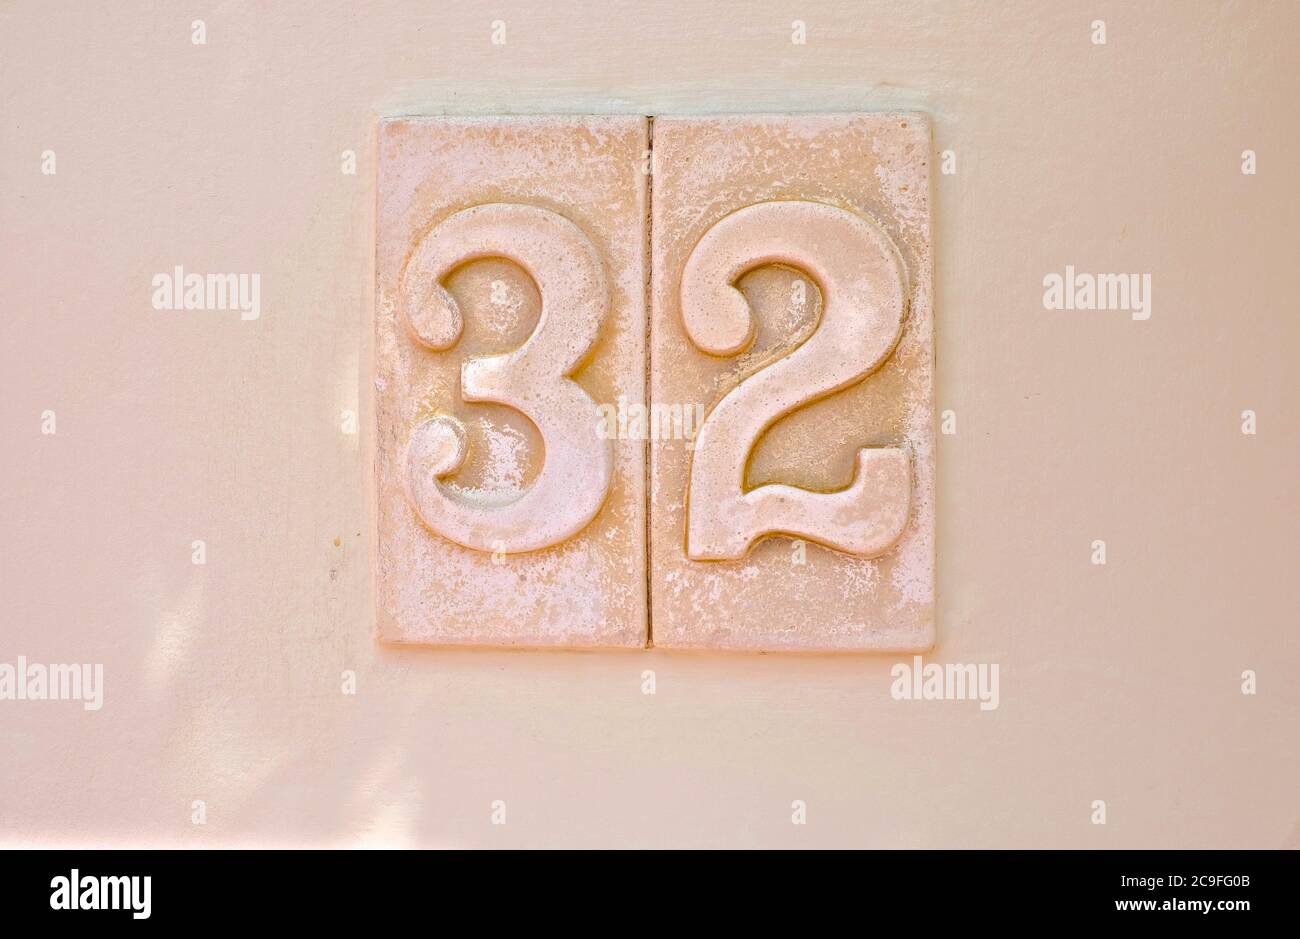 32, number thirty-two, light tone digits on pale background surface. Stock Photo